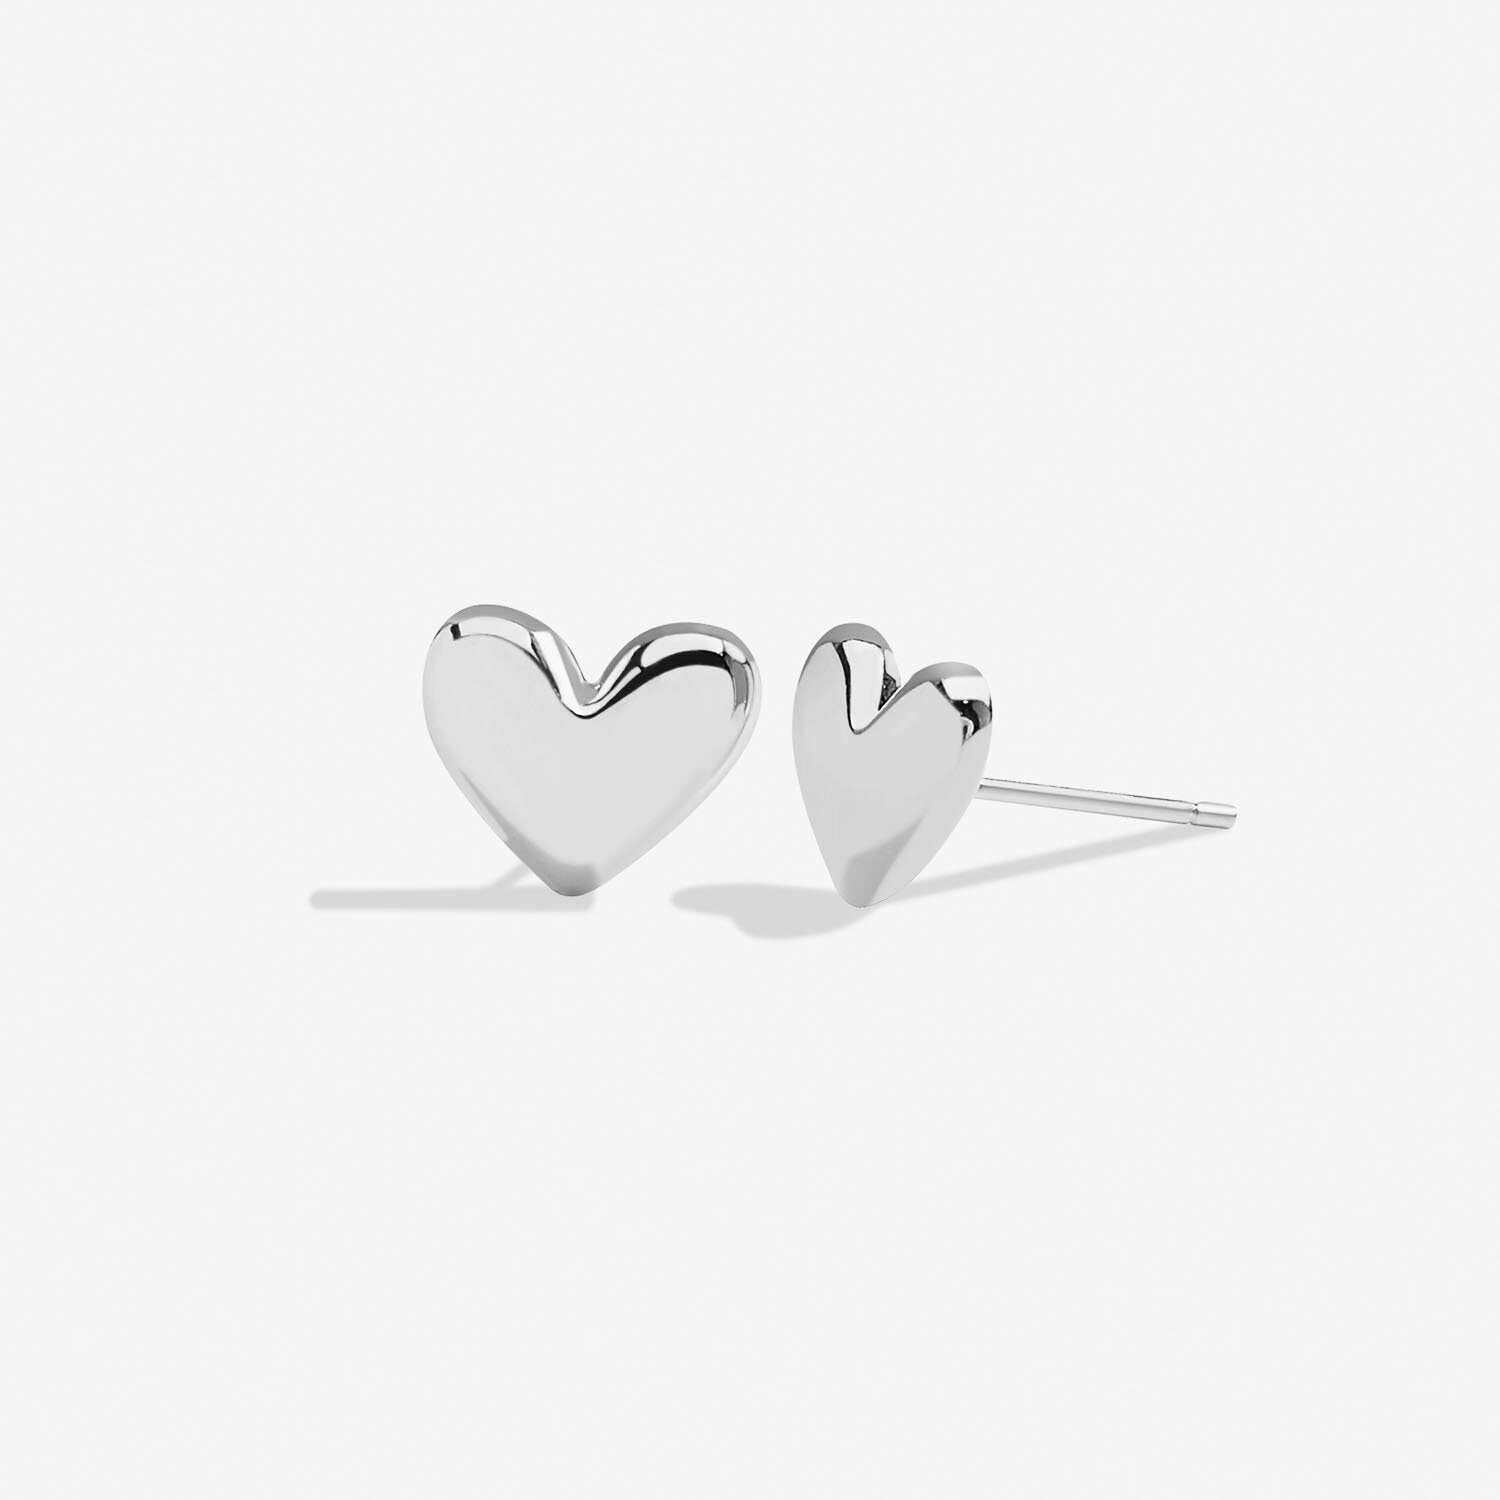 From The Heart Gift Box 'Love You Mummy' Earrings